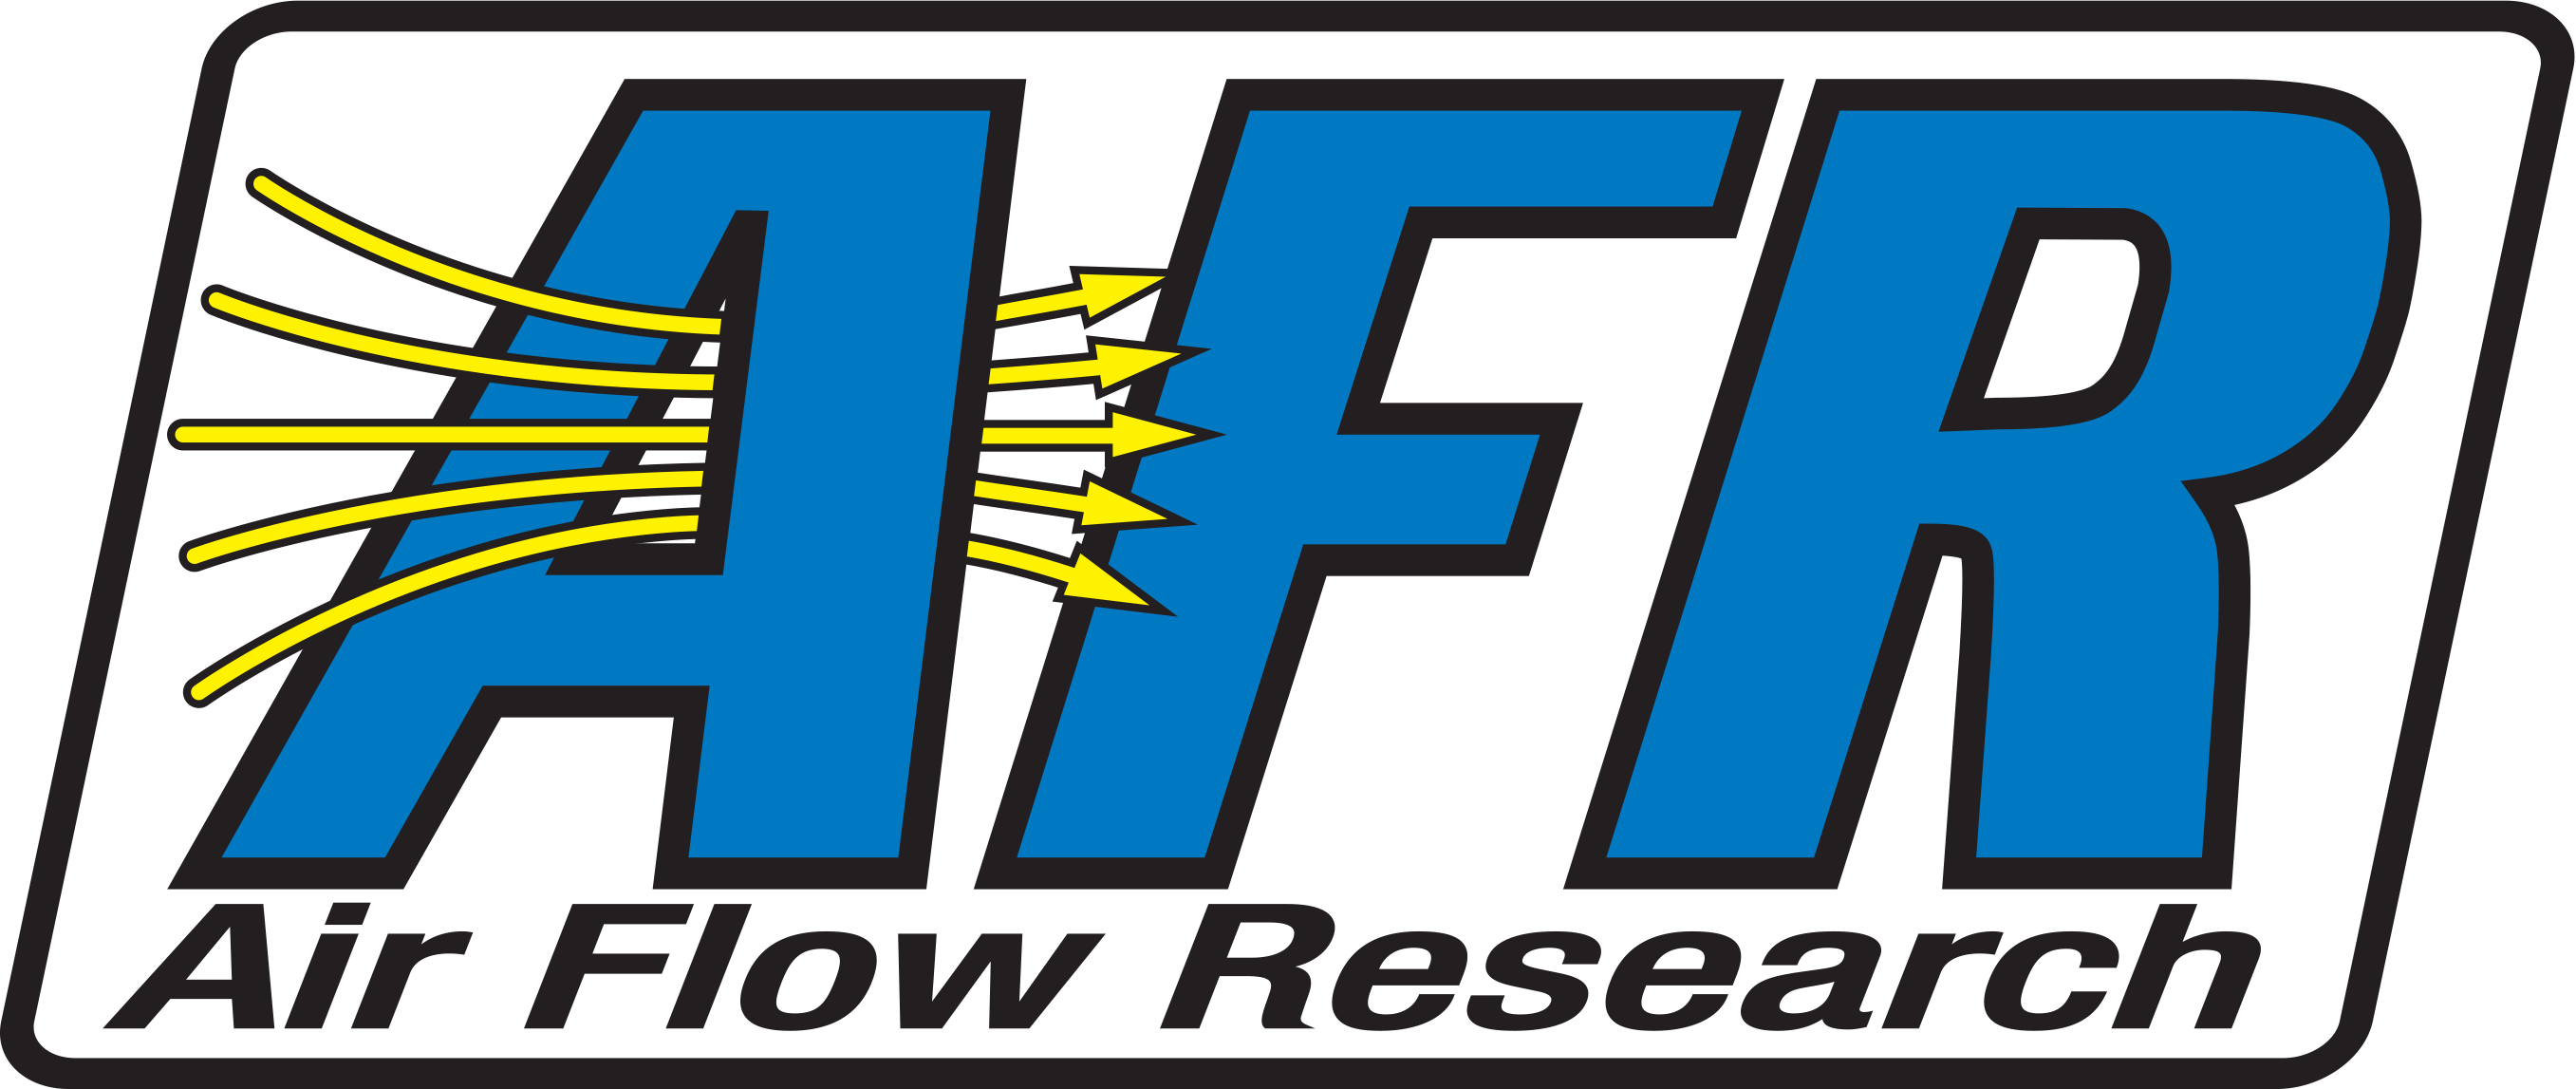 Air Flow Research (9742) Apparel/Promotional